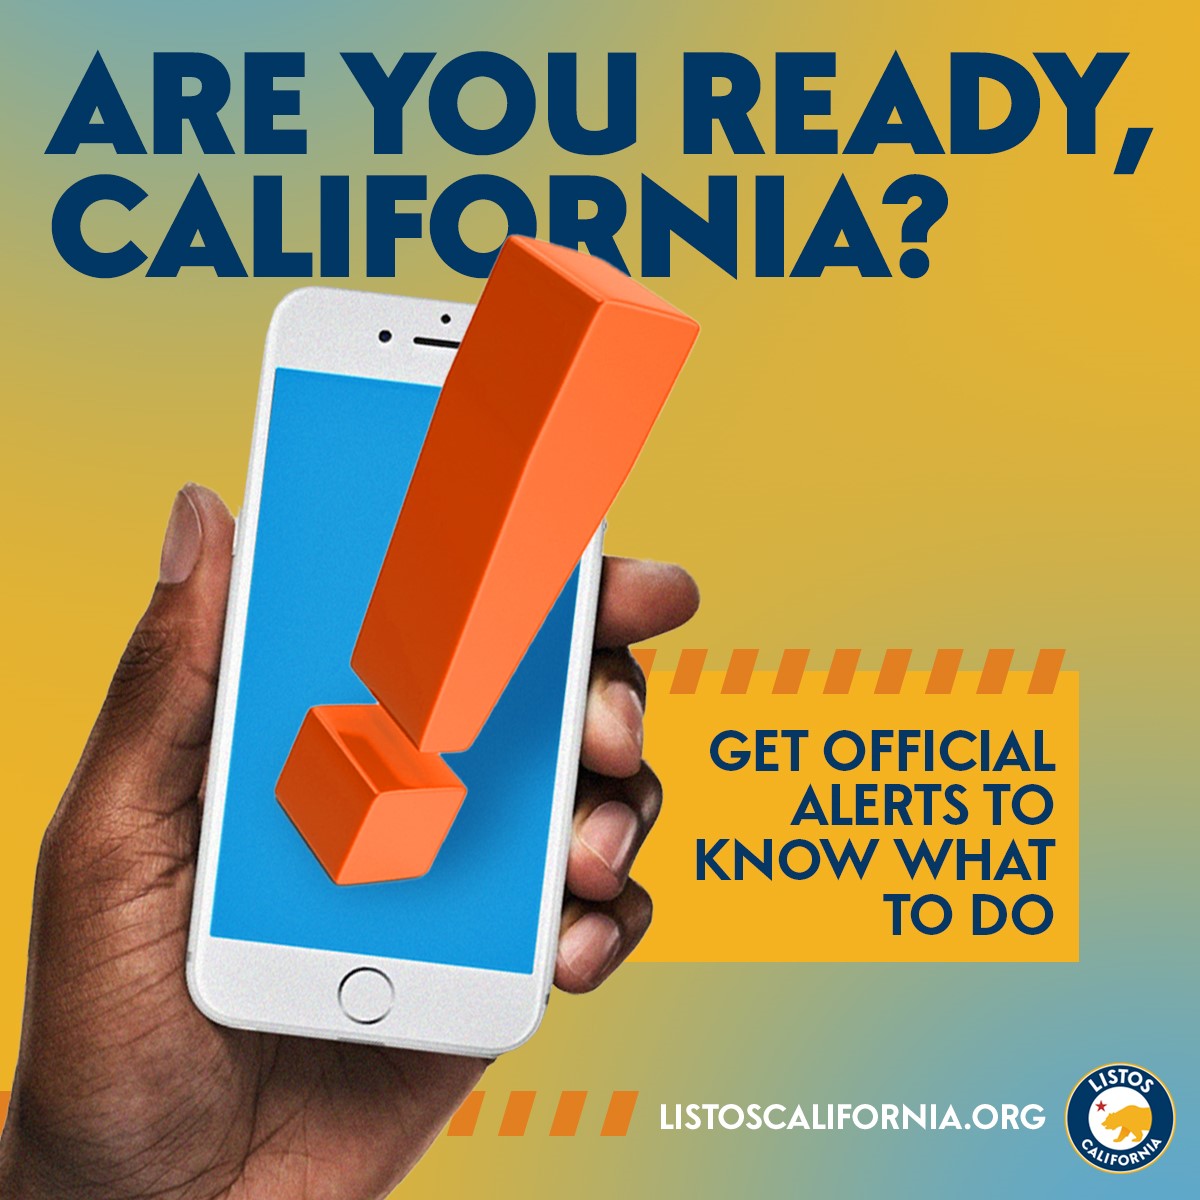 During Earthquake Preparedness Month, the state is sharing multilingual resources and calling on Californians to sign up for alerts through the state’s first-in-the-nation Earthquake Early Warning System to prepare for the next big one. earthquake.ca.gov/get-alerts/